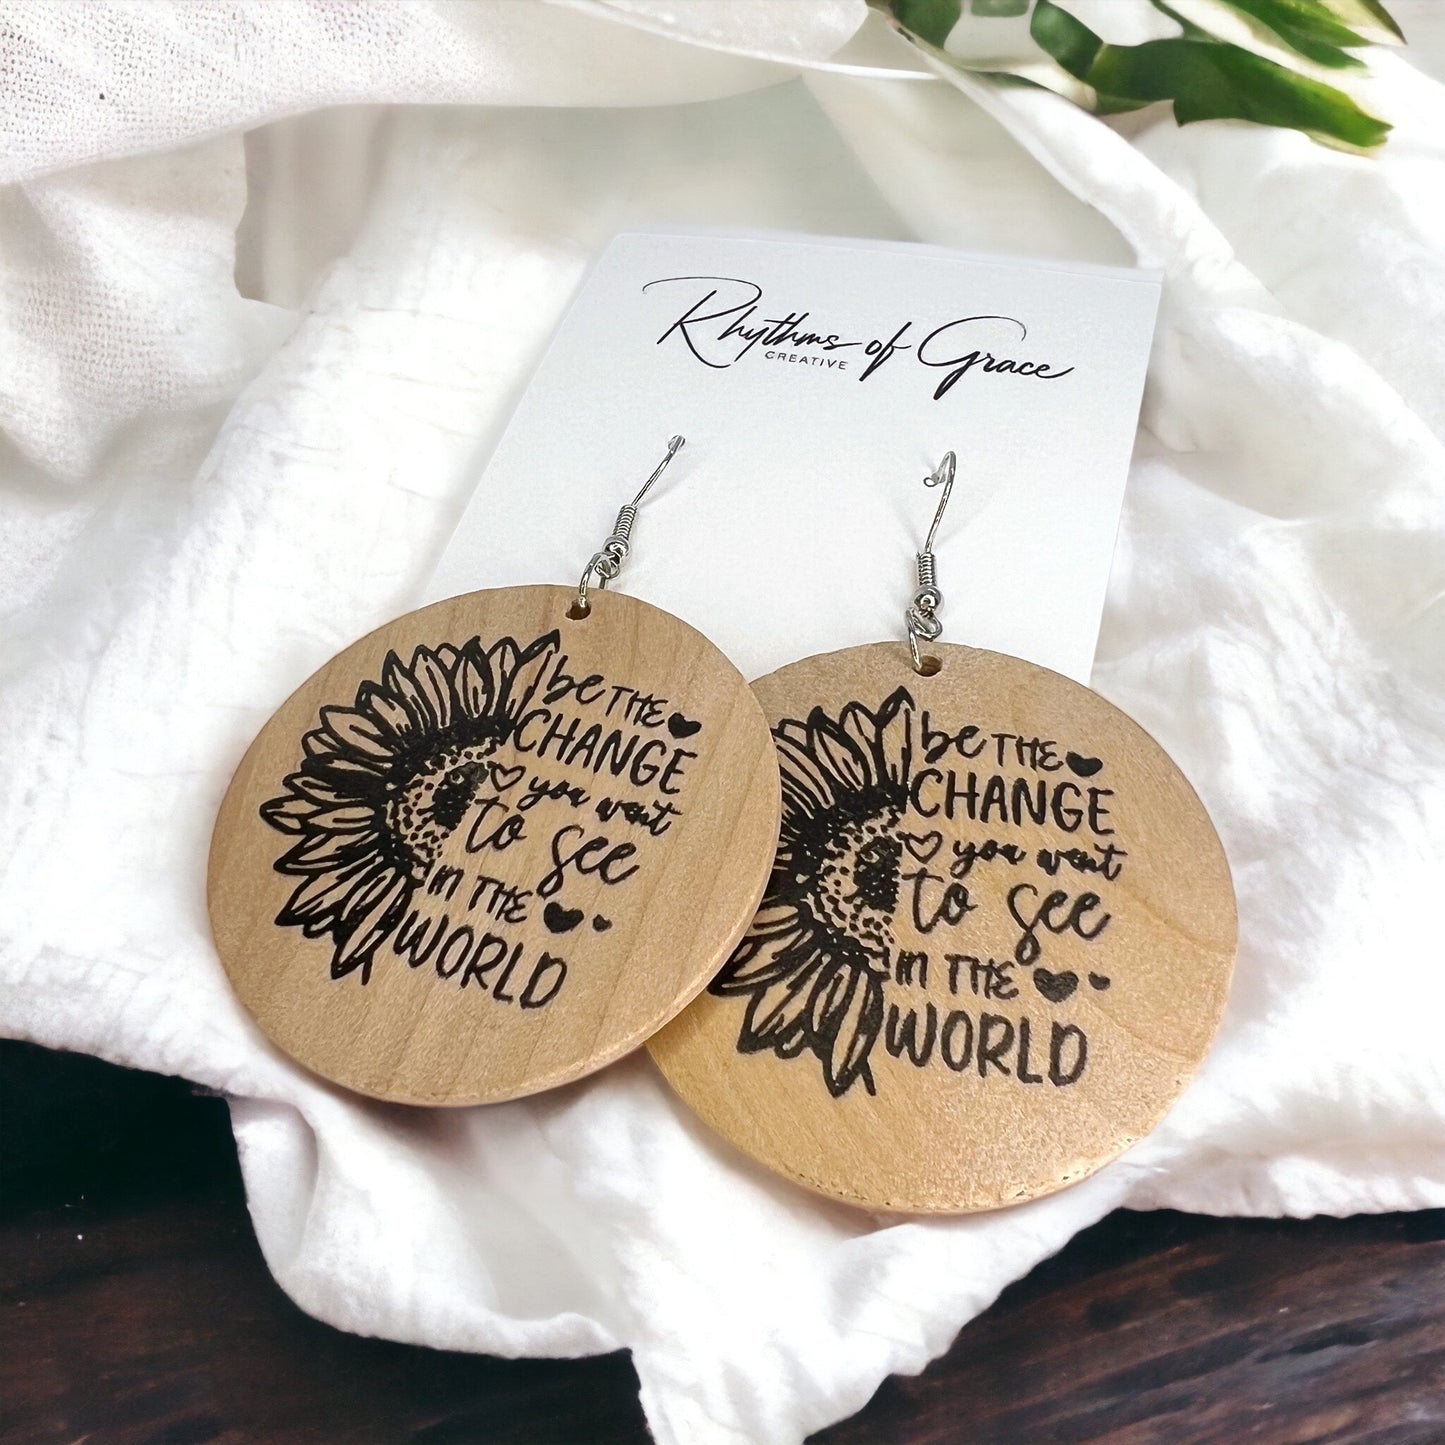 Be the Change Earrings - Patriarchy Earrings, Spread Kindness, Kindness Earrings, Empowerment Accessories